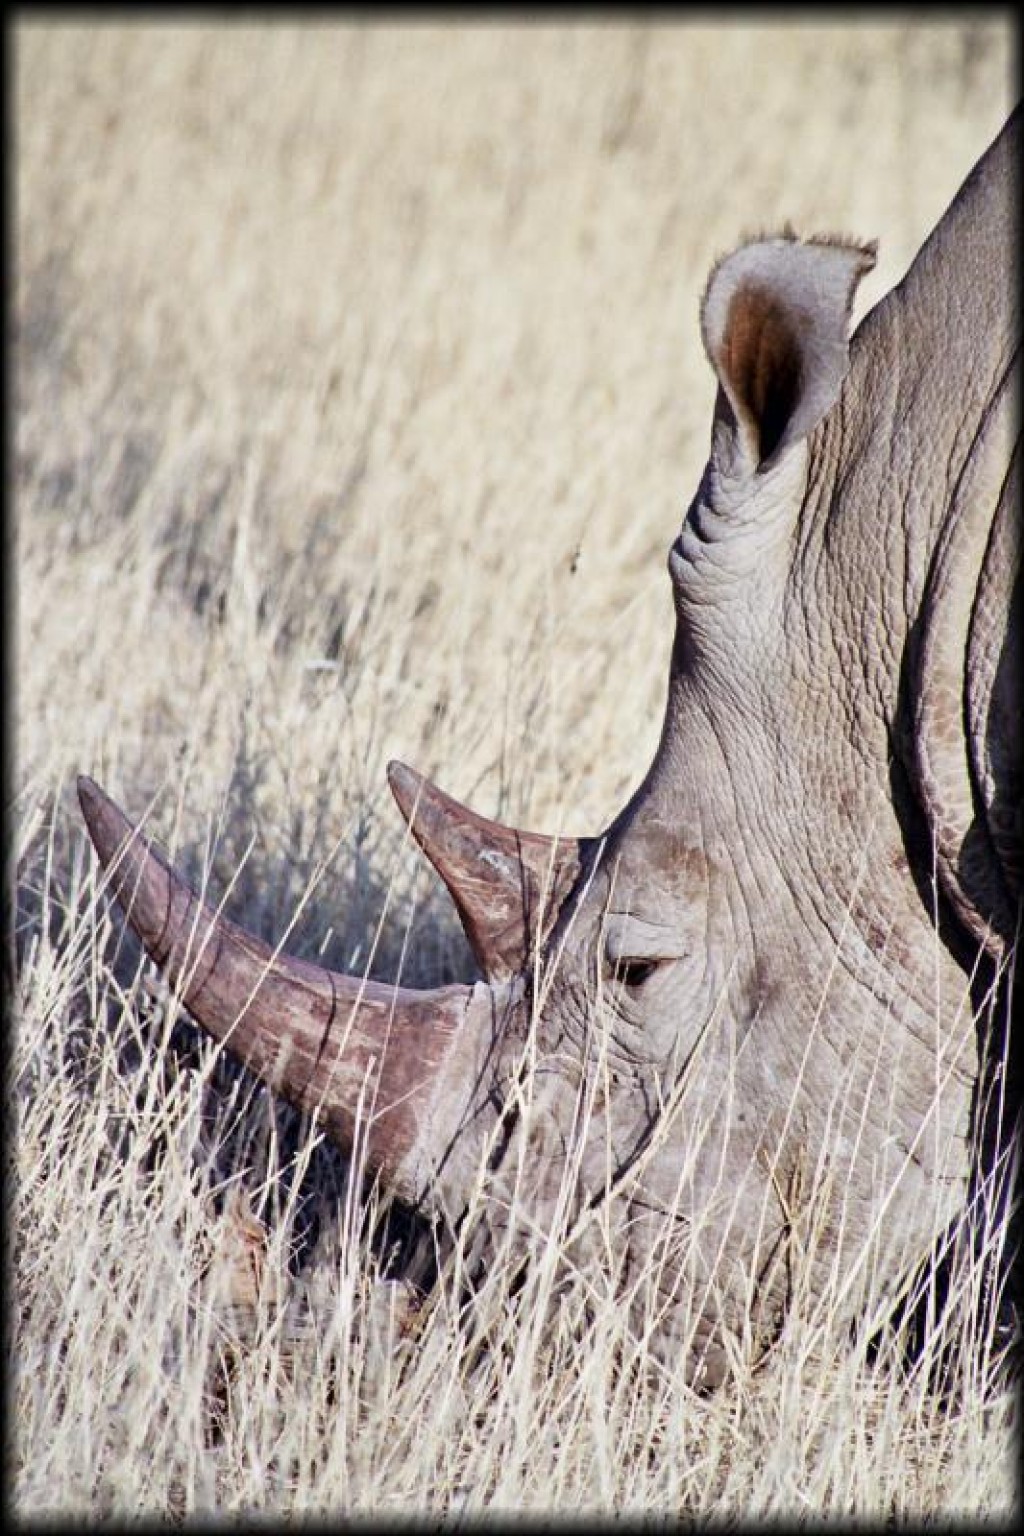 .. and, the reason we went, to see the final of the "big five". The park has 4 white rhino.